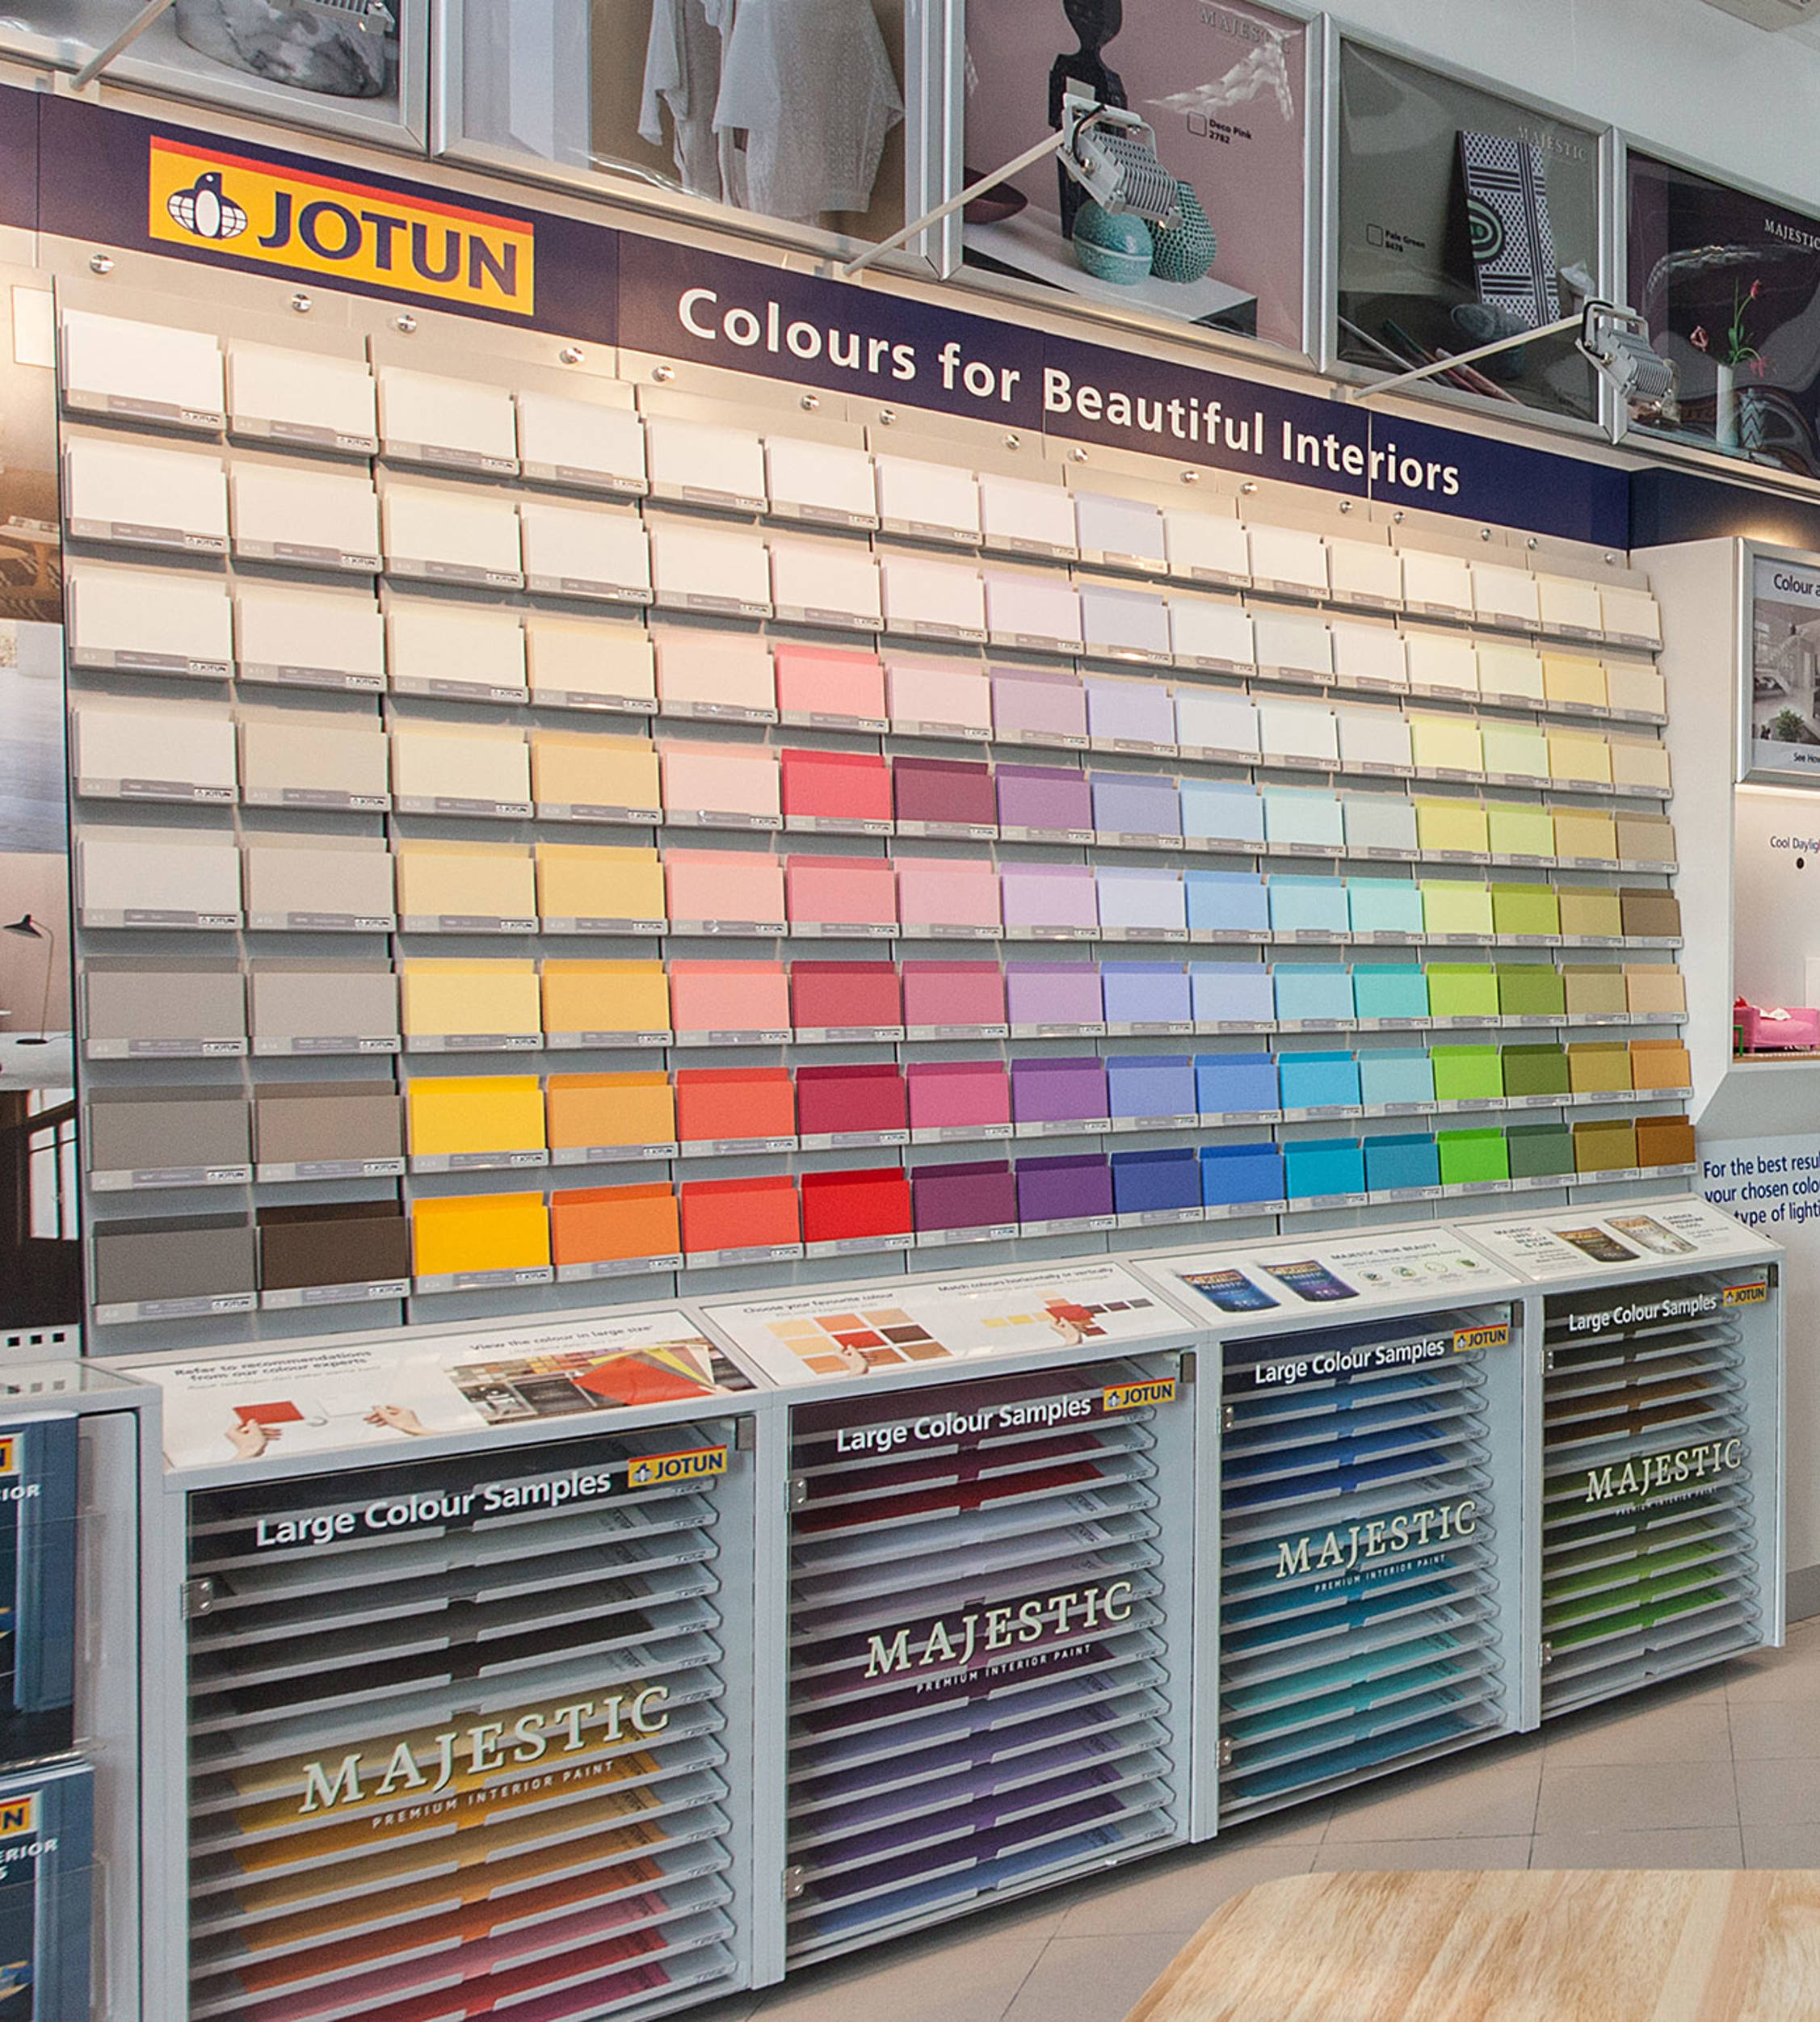 A Jotun display in a paint shop